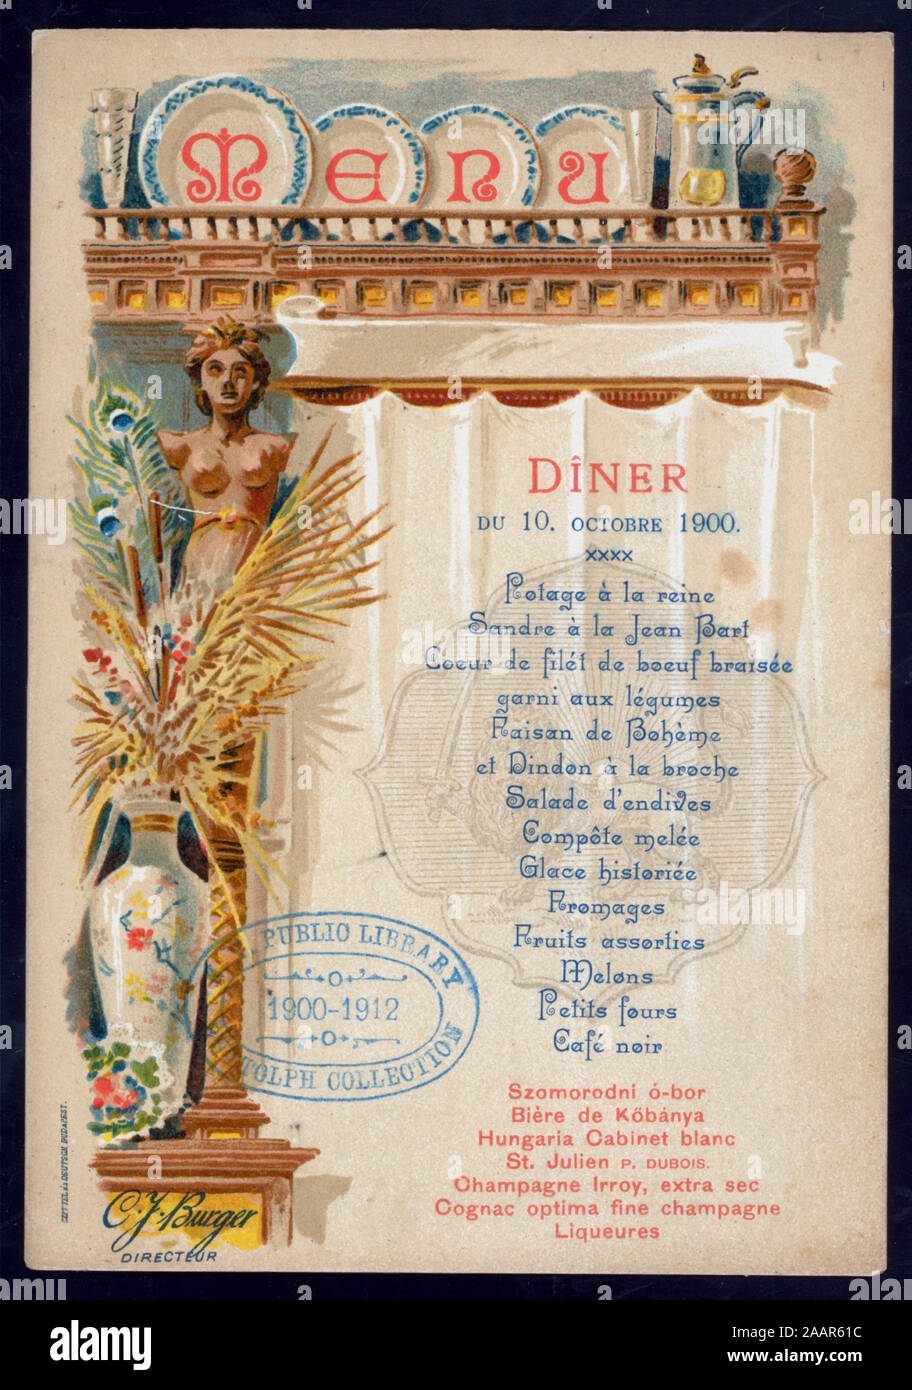 DINNER (held by) GRAND HOTEL (at) BUDAPEST, HUNGARY (HOTEL;) MENU IN  FRENCH,WINES INCLUDED;; DINNER [held by] GRAND HOTEL [at] BUDAPEST, HUNGARY  (HOTEL Stock Photo - Alamy